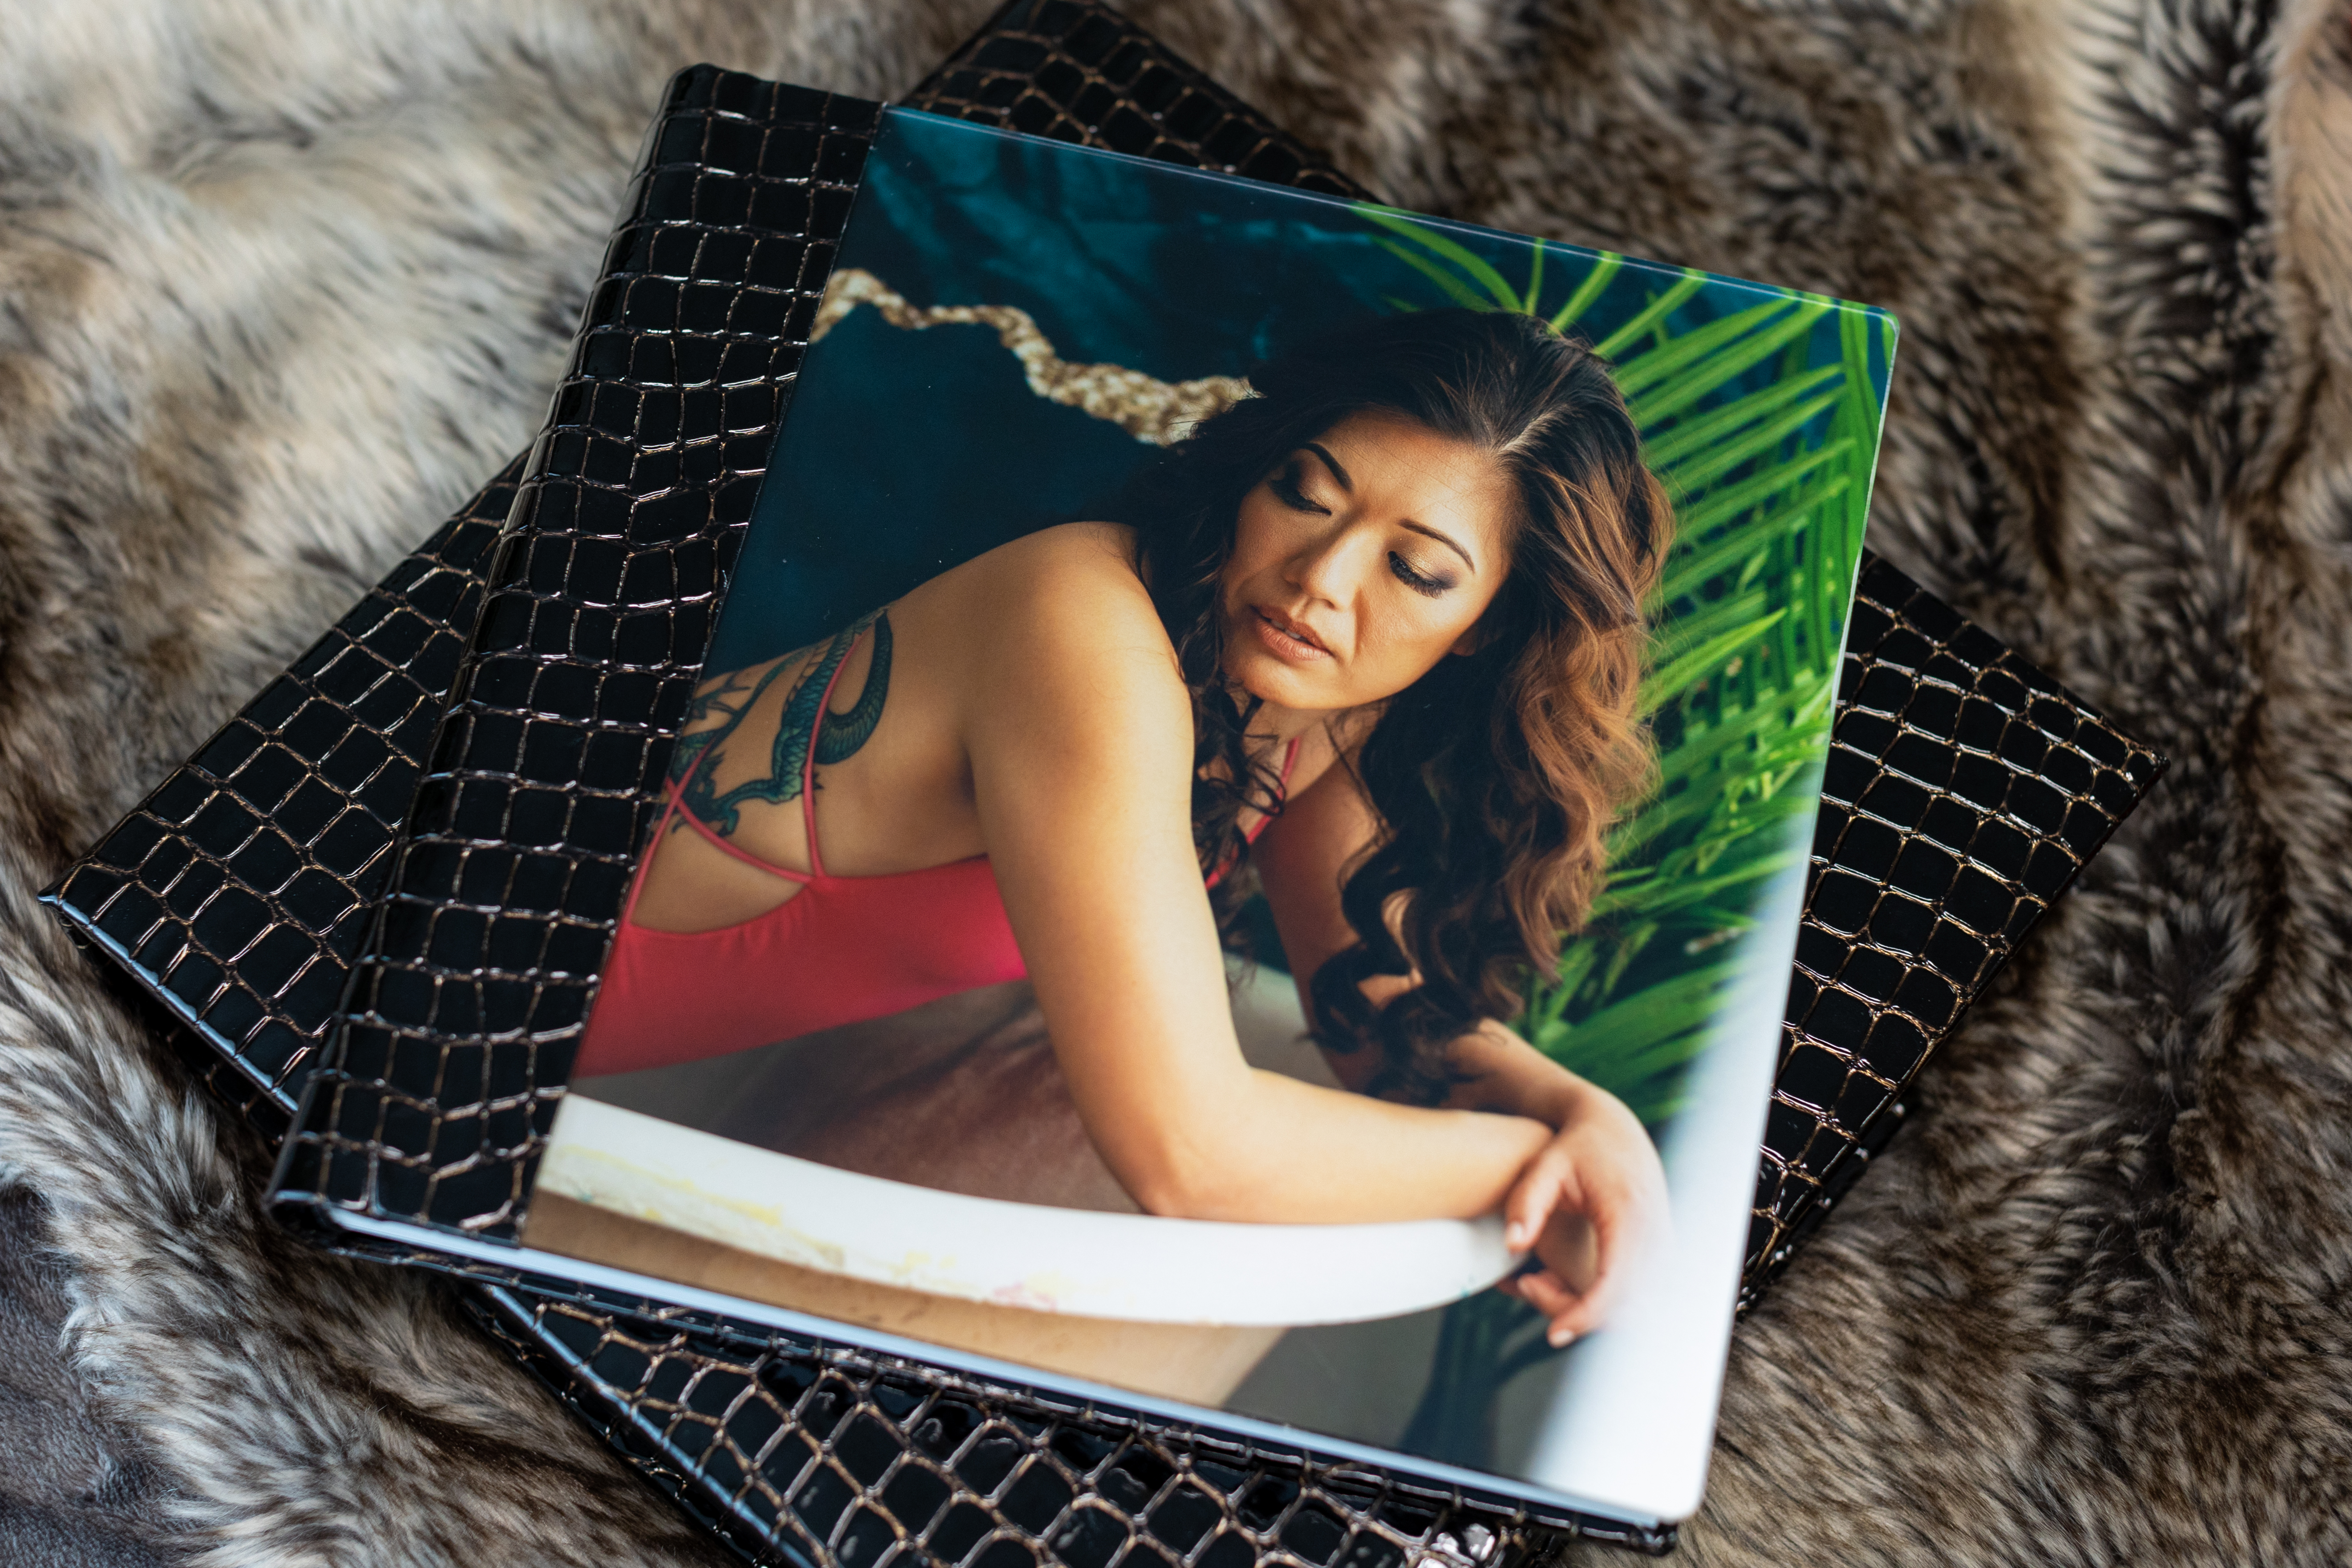 Boudoir printed products